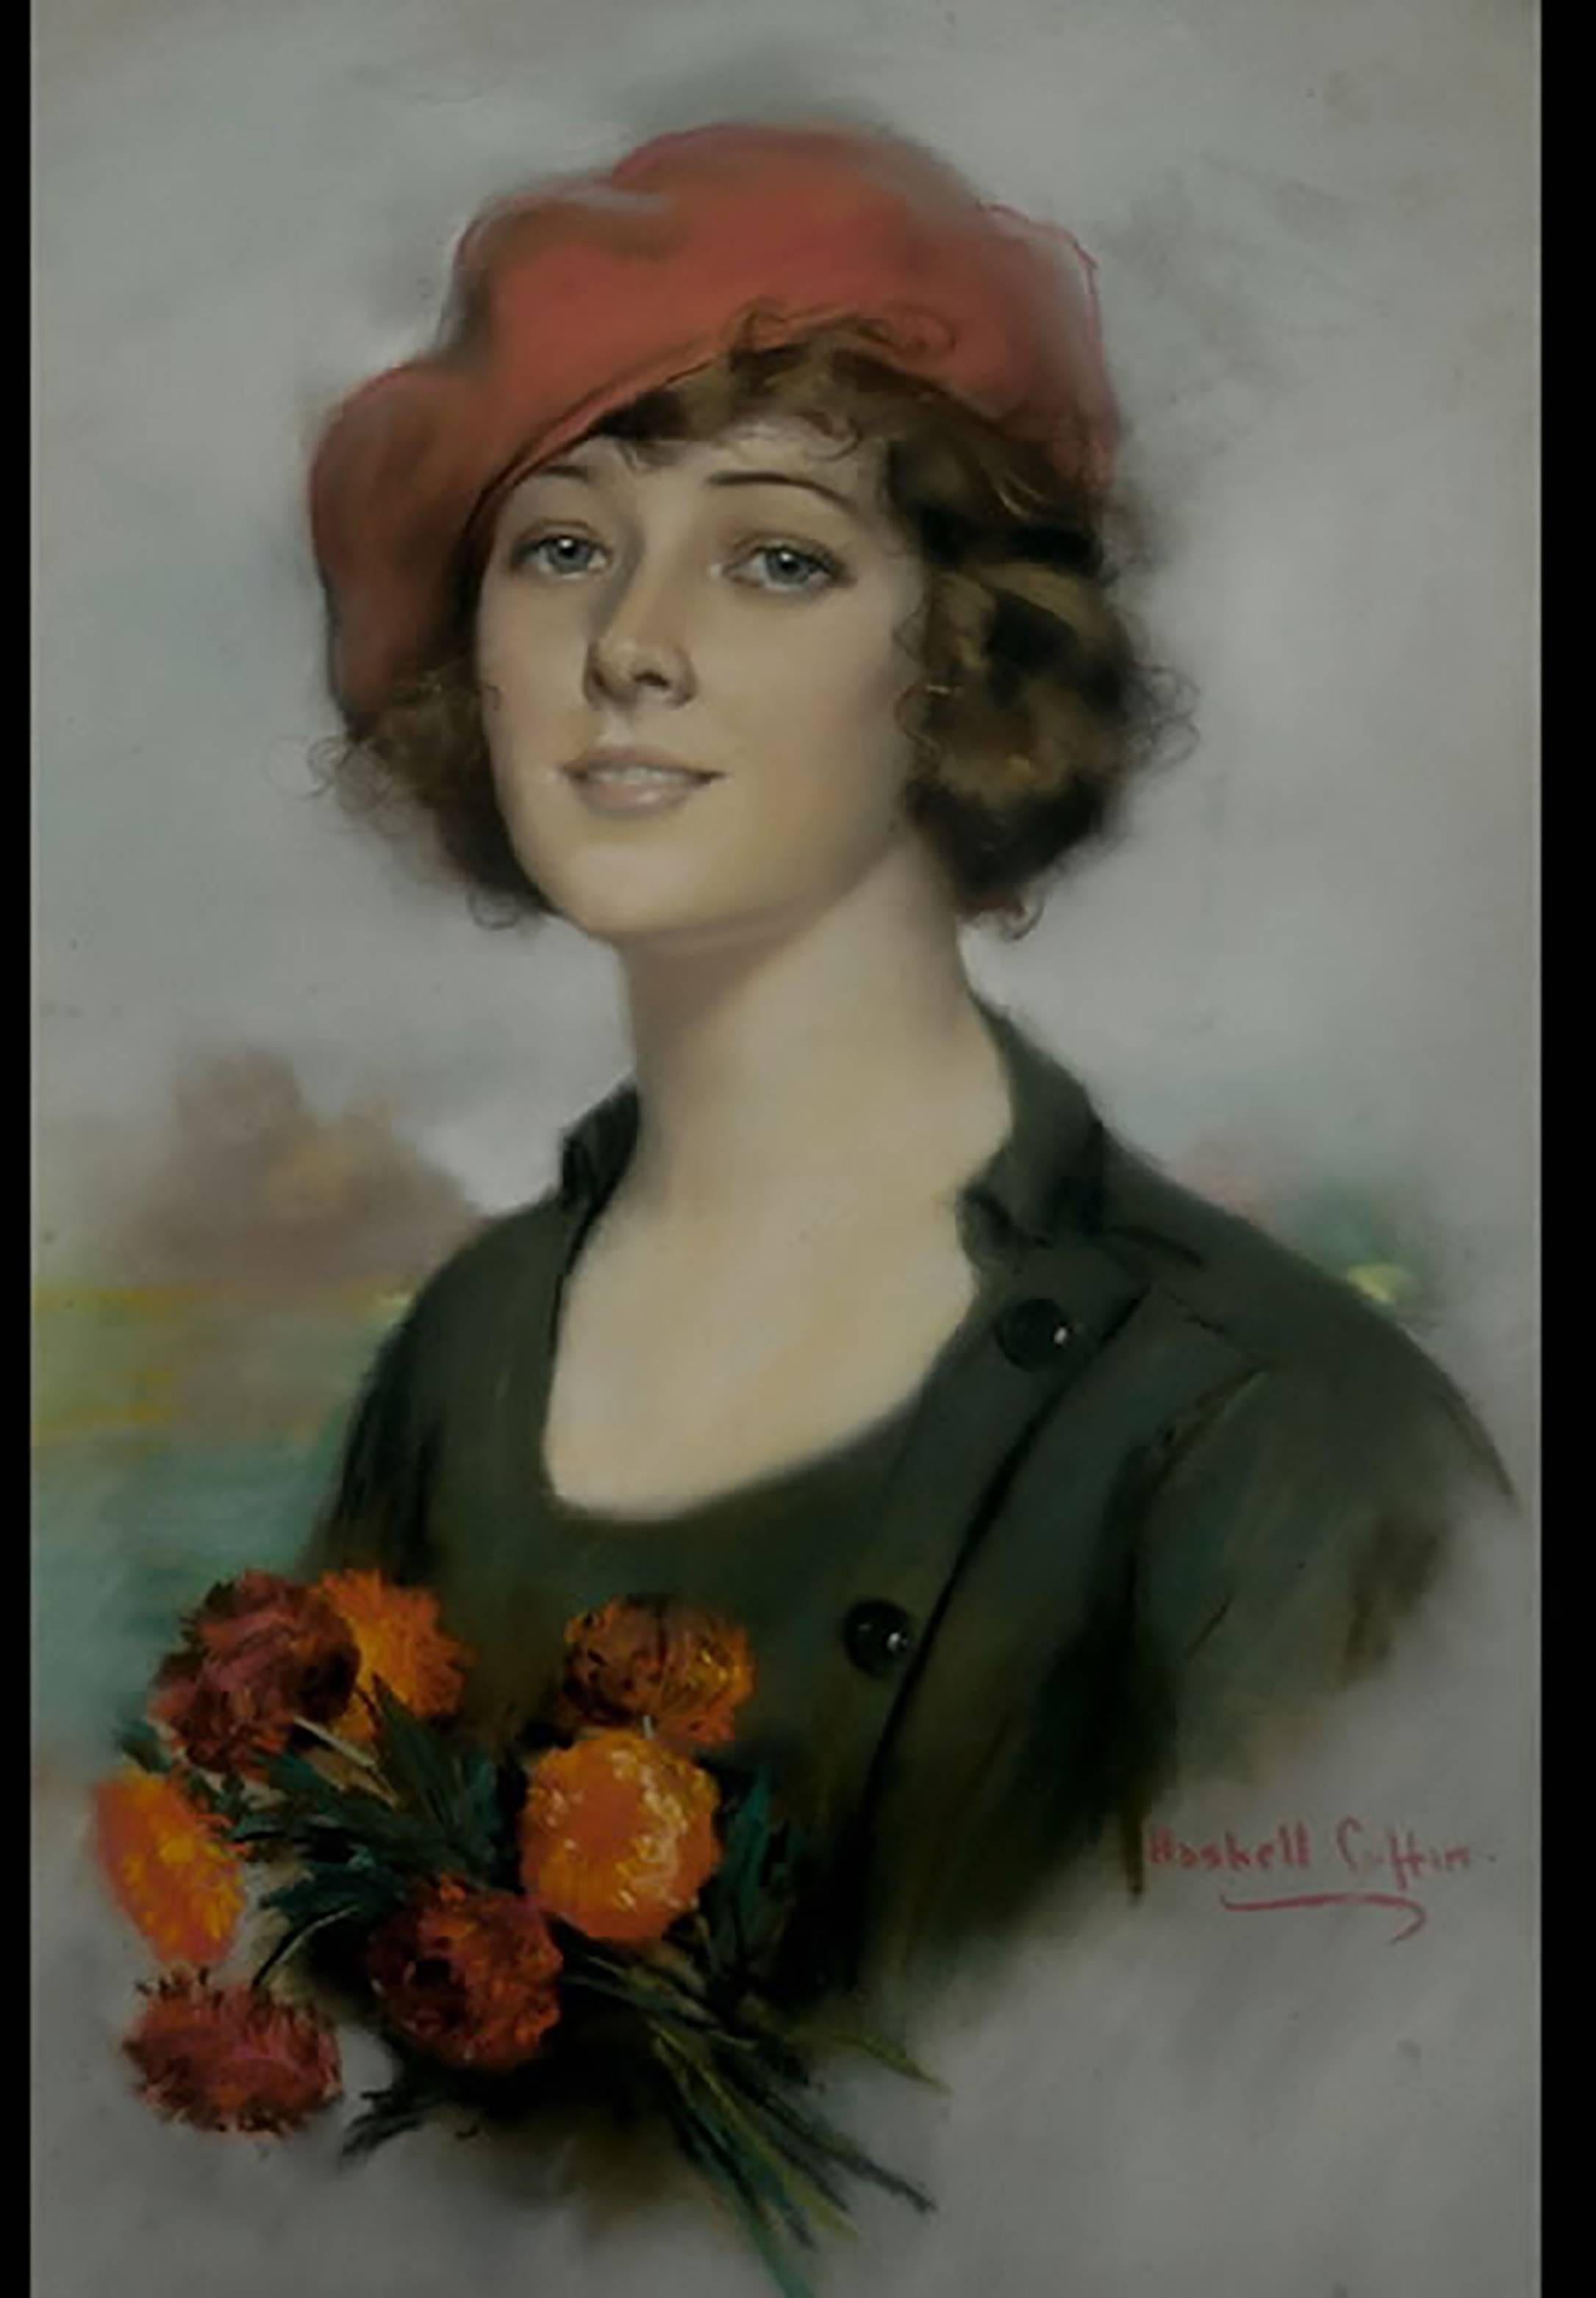 William Haskell Coffin Portrait - A Young Beauty Holding Flowers